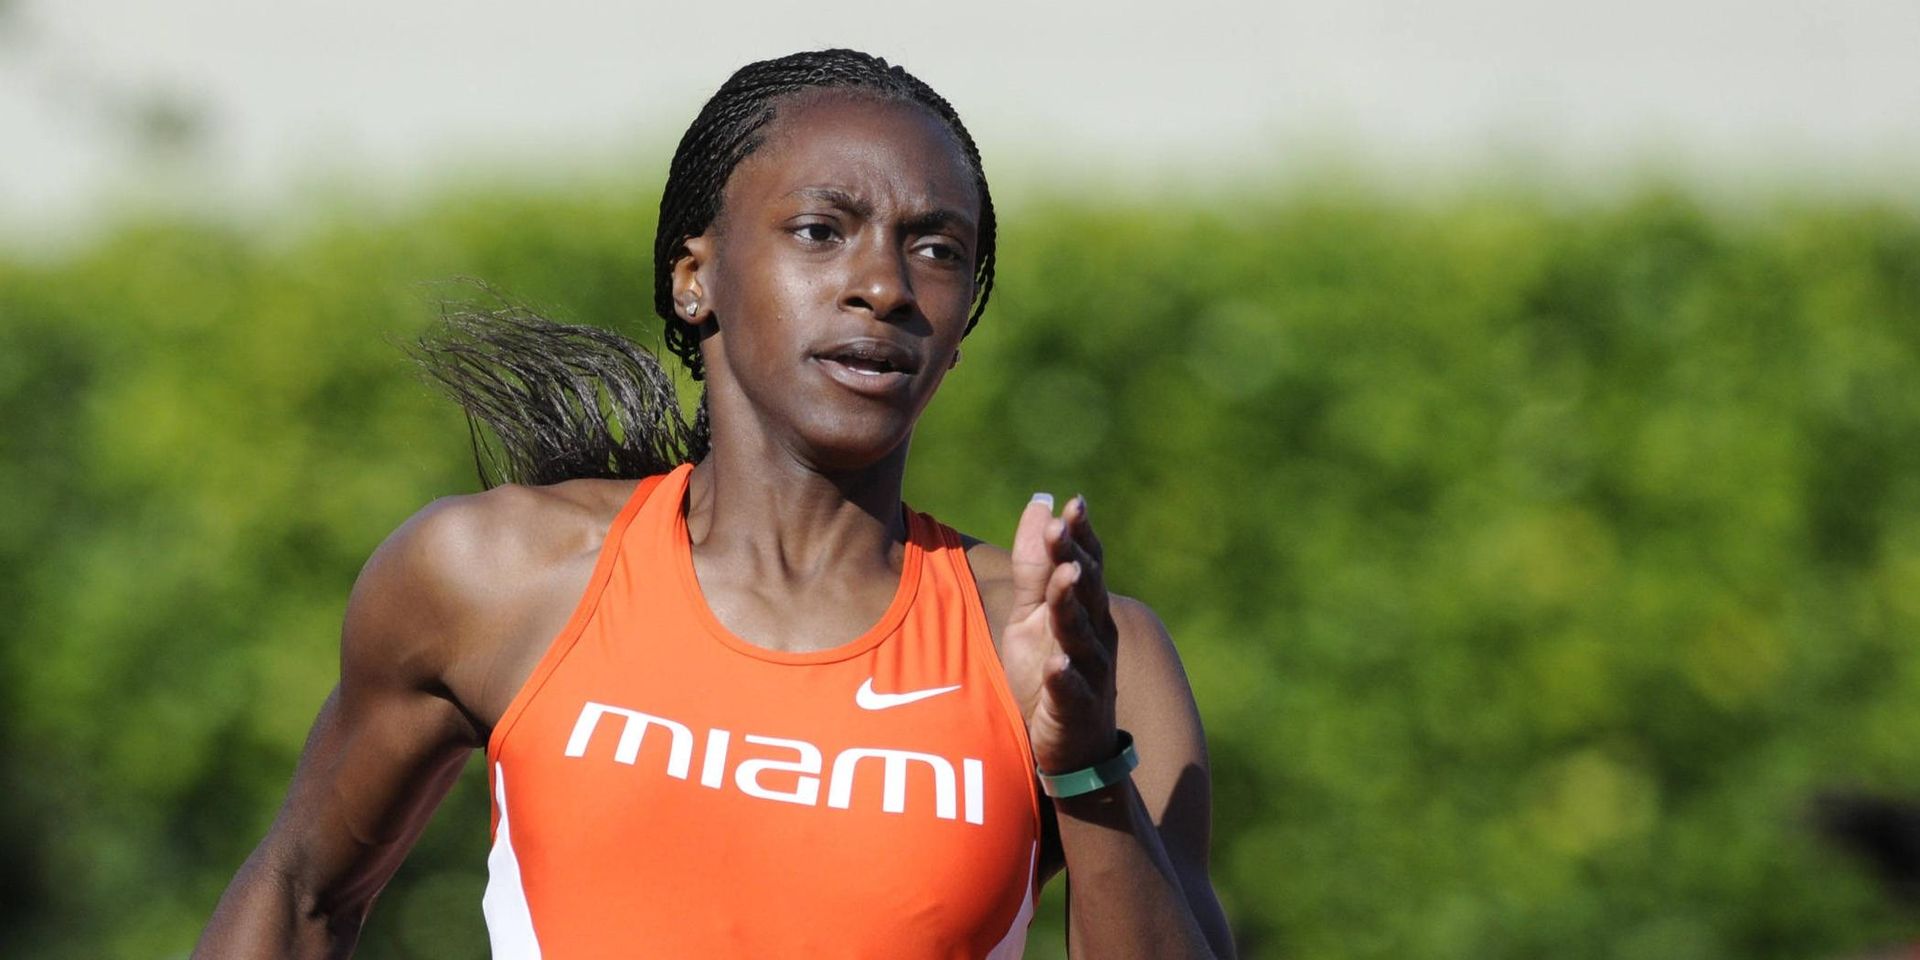 @MiamiTrack Finishes Strong At McCravy Meet